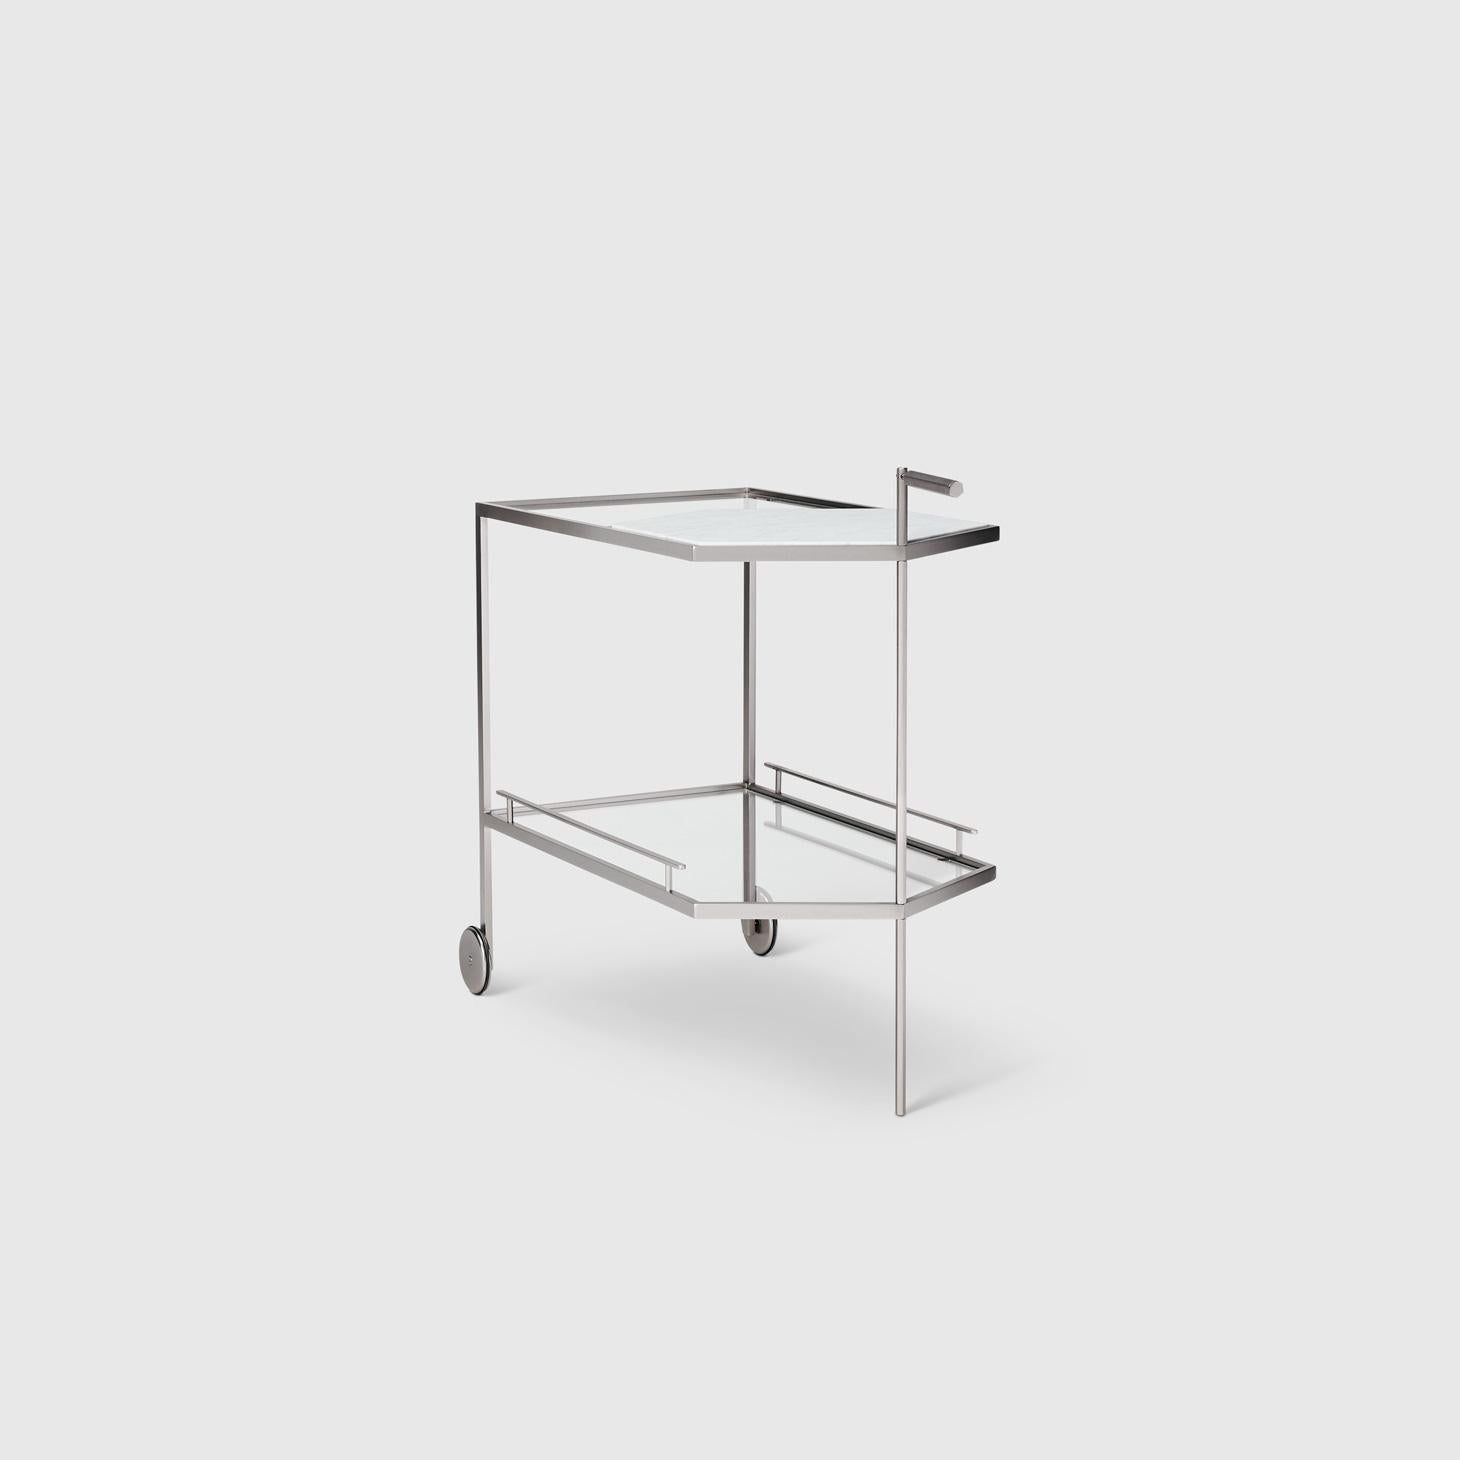 The Gin Lane bar cart by Yabu Pushelberg has a minimal profile in smoked bronze paired with Calacatta marble or smoked brass paired with Carrara marble. The simple profile takes precision craftsmanship by experts in Italy and creates a statement